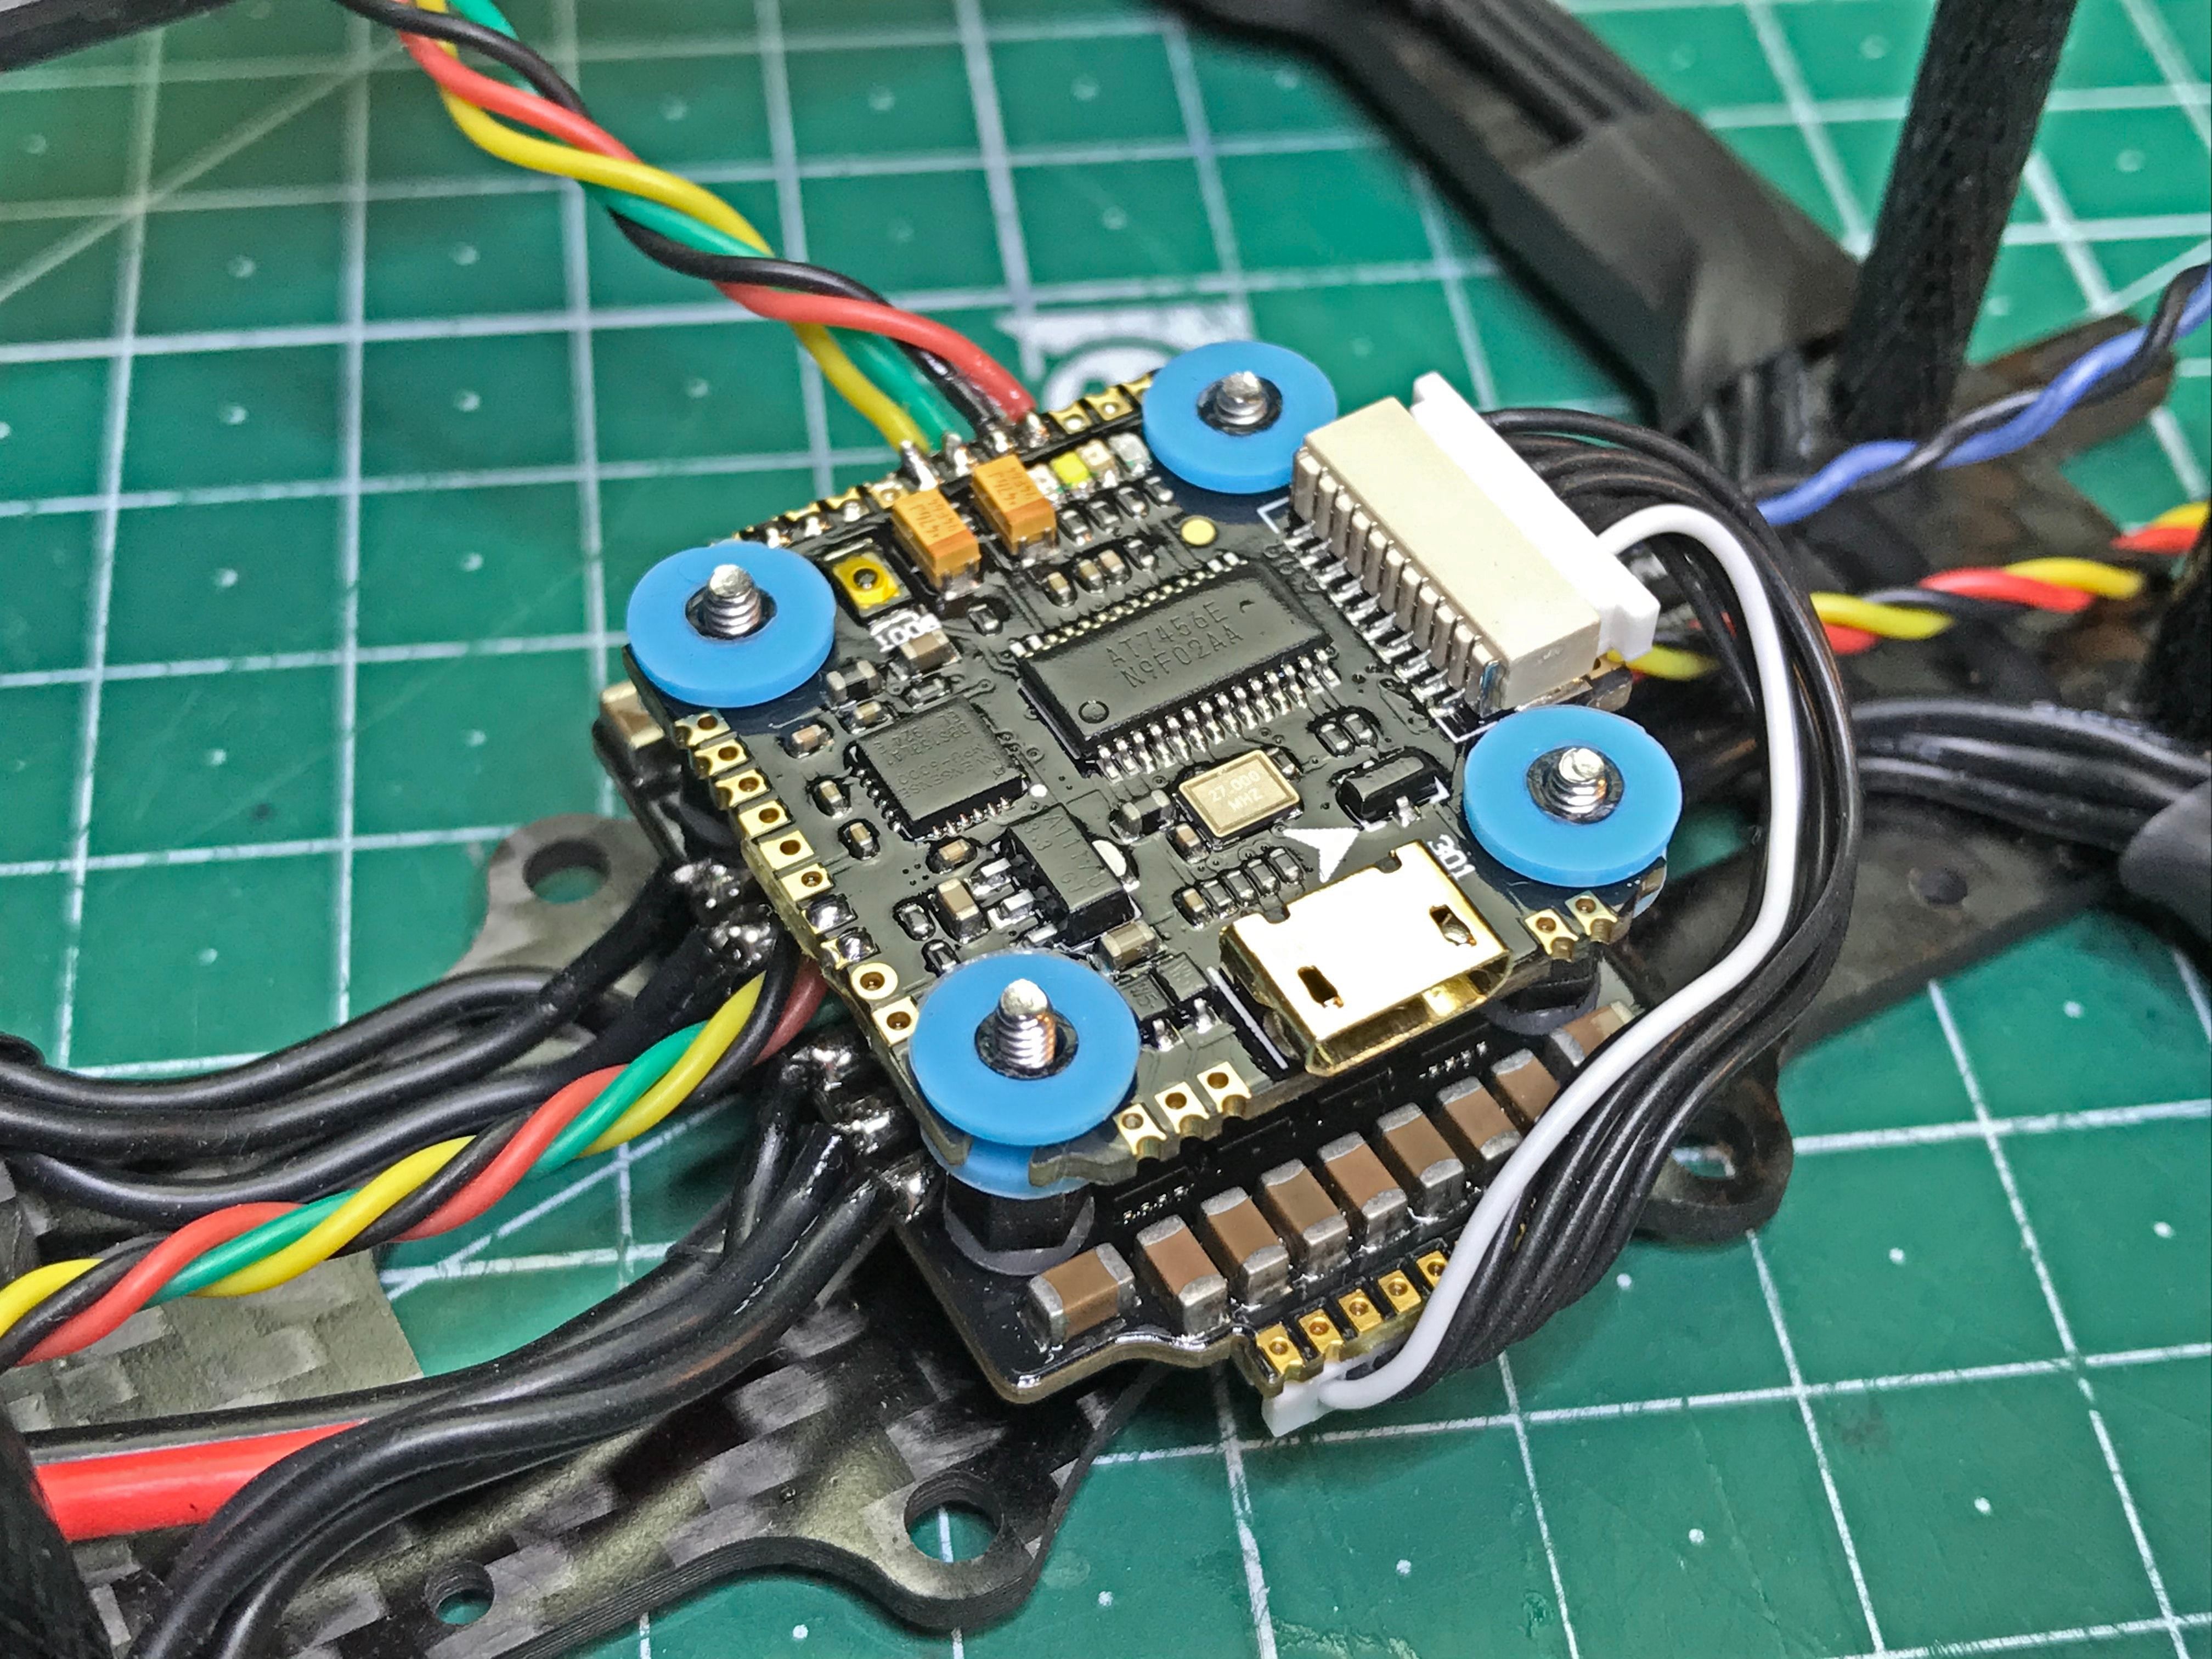 Flight controller in the stack